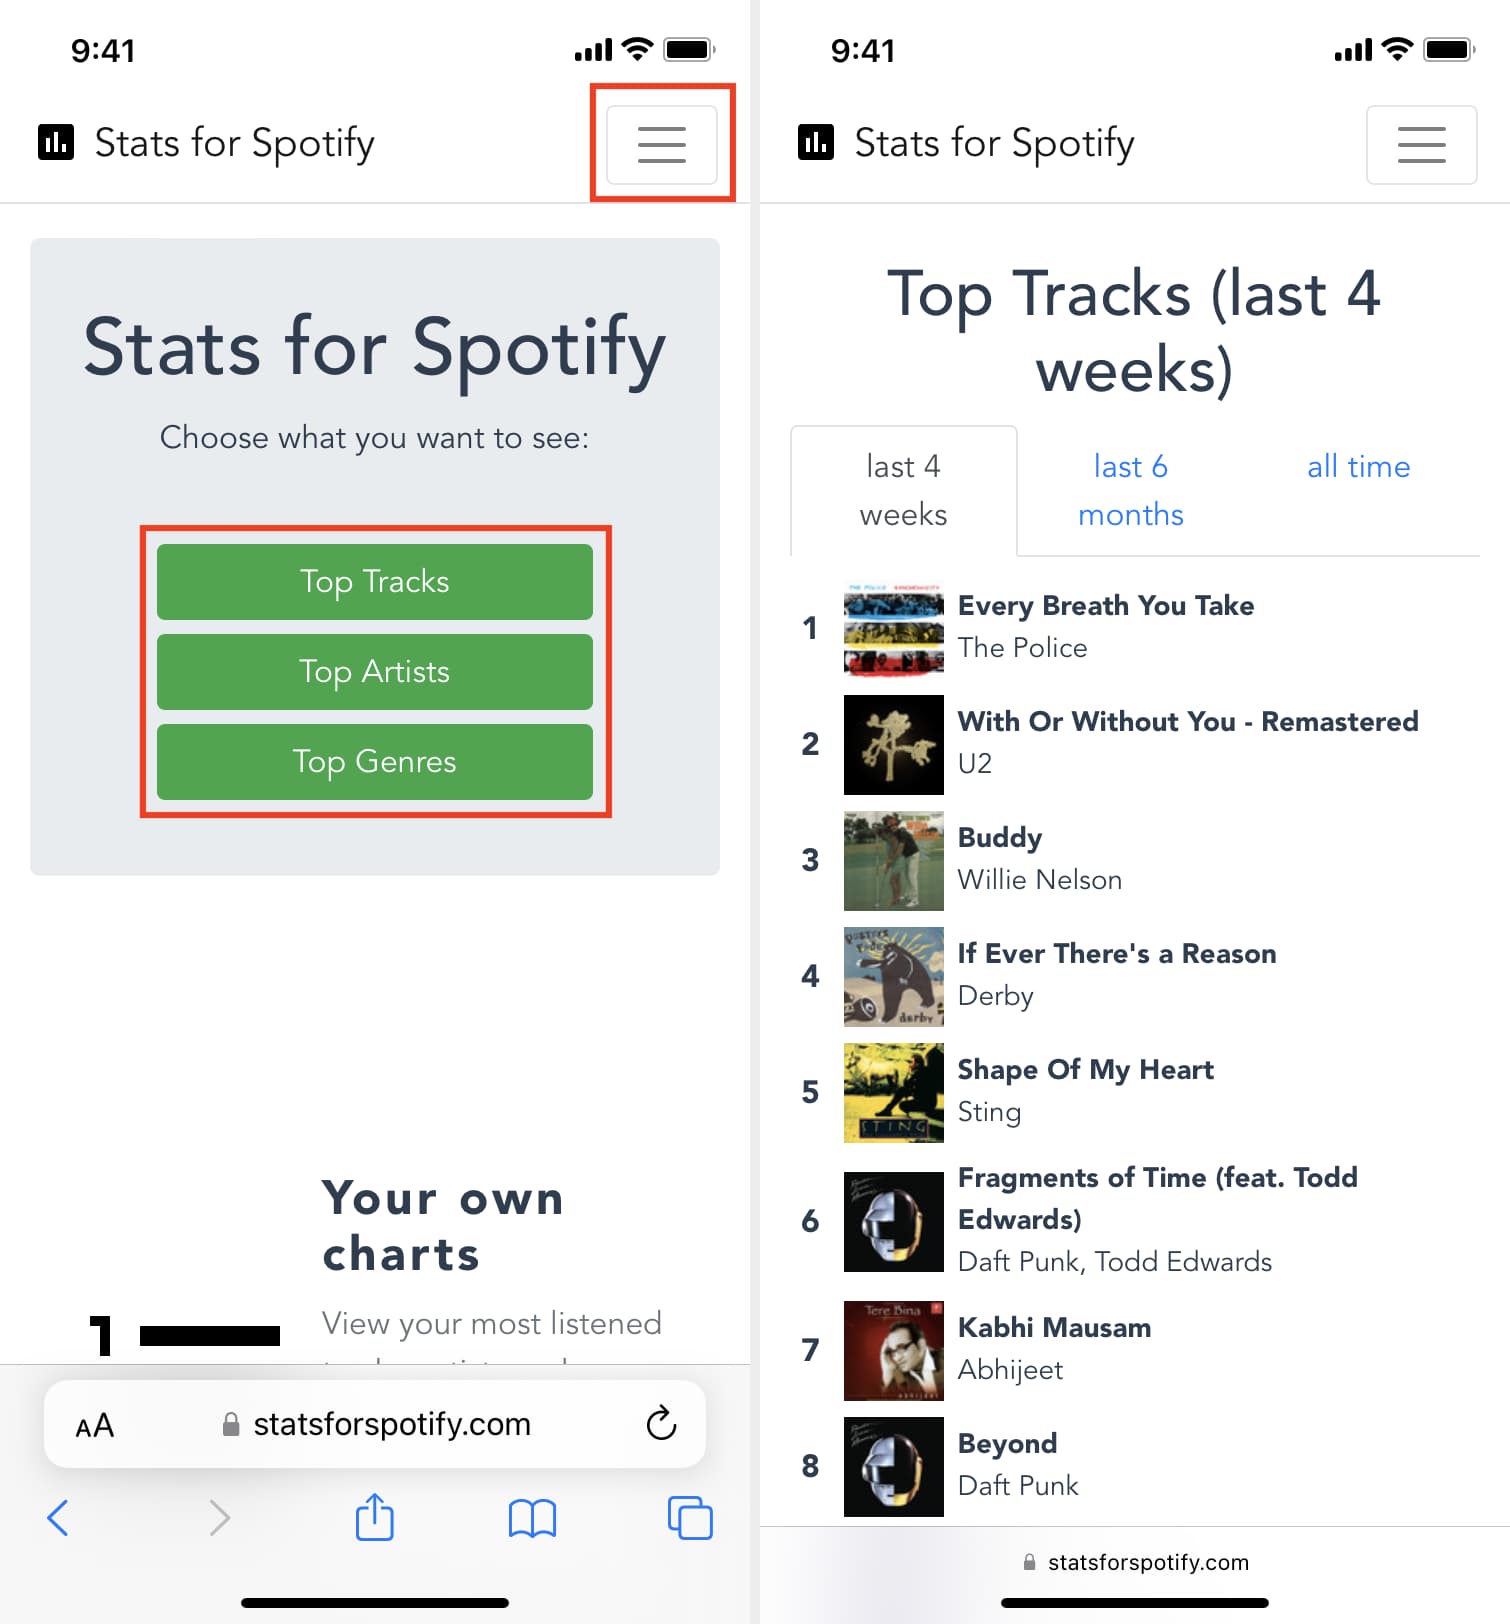 Using Stats for Spotify to see your top tracks for the last one month, six months, or all time